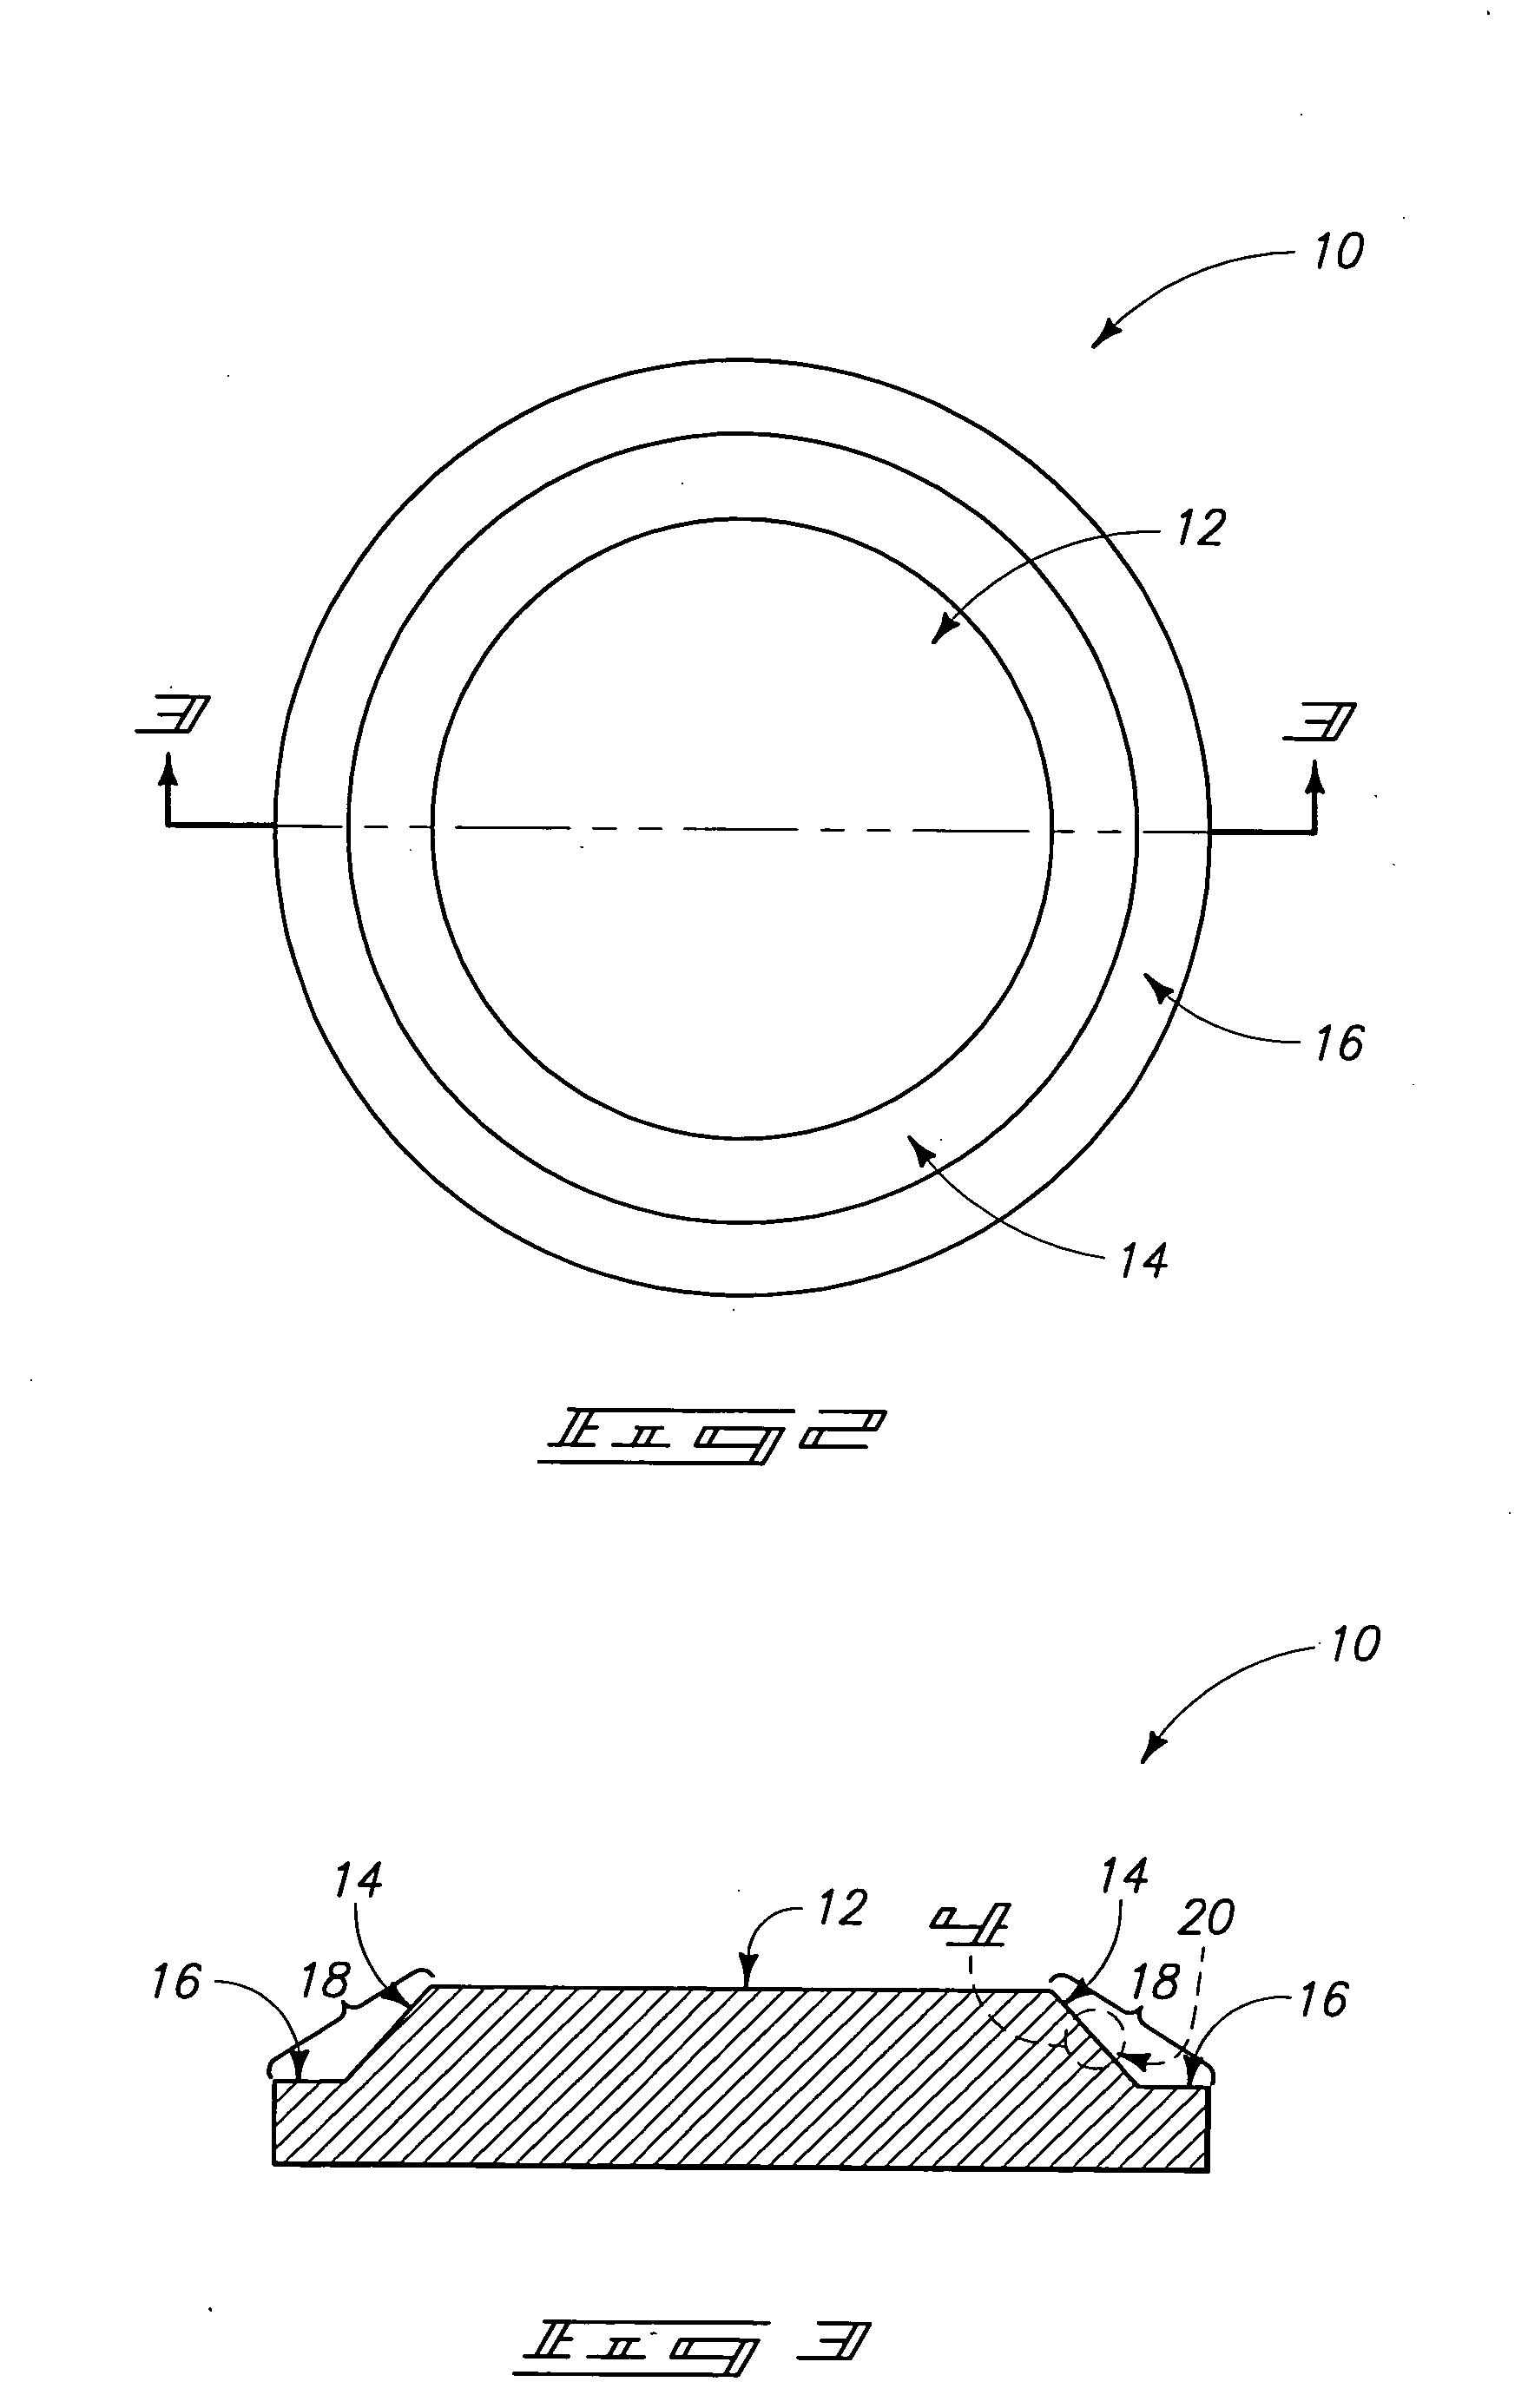 Methods of treating non-sputtered regions of PVD target constructions to form particle traps